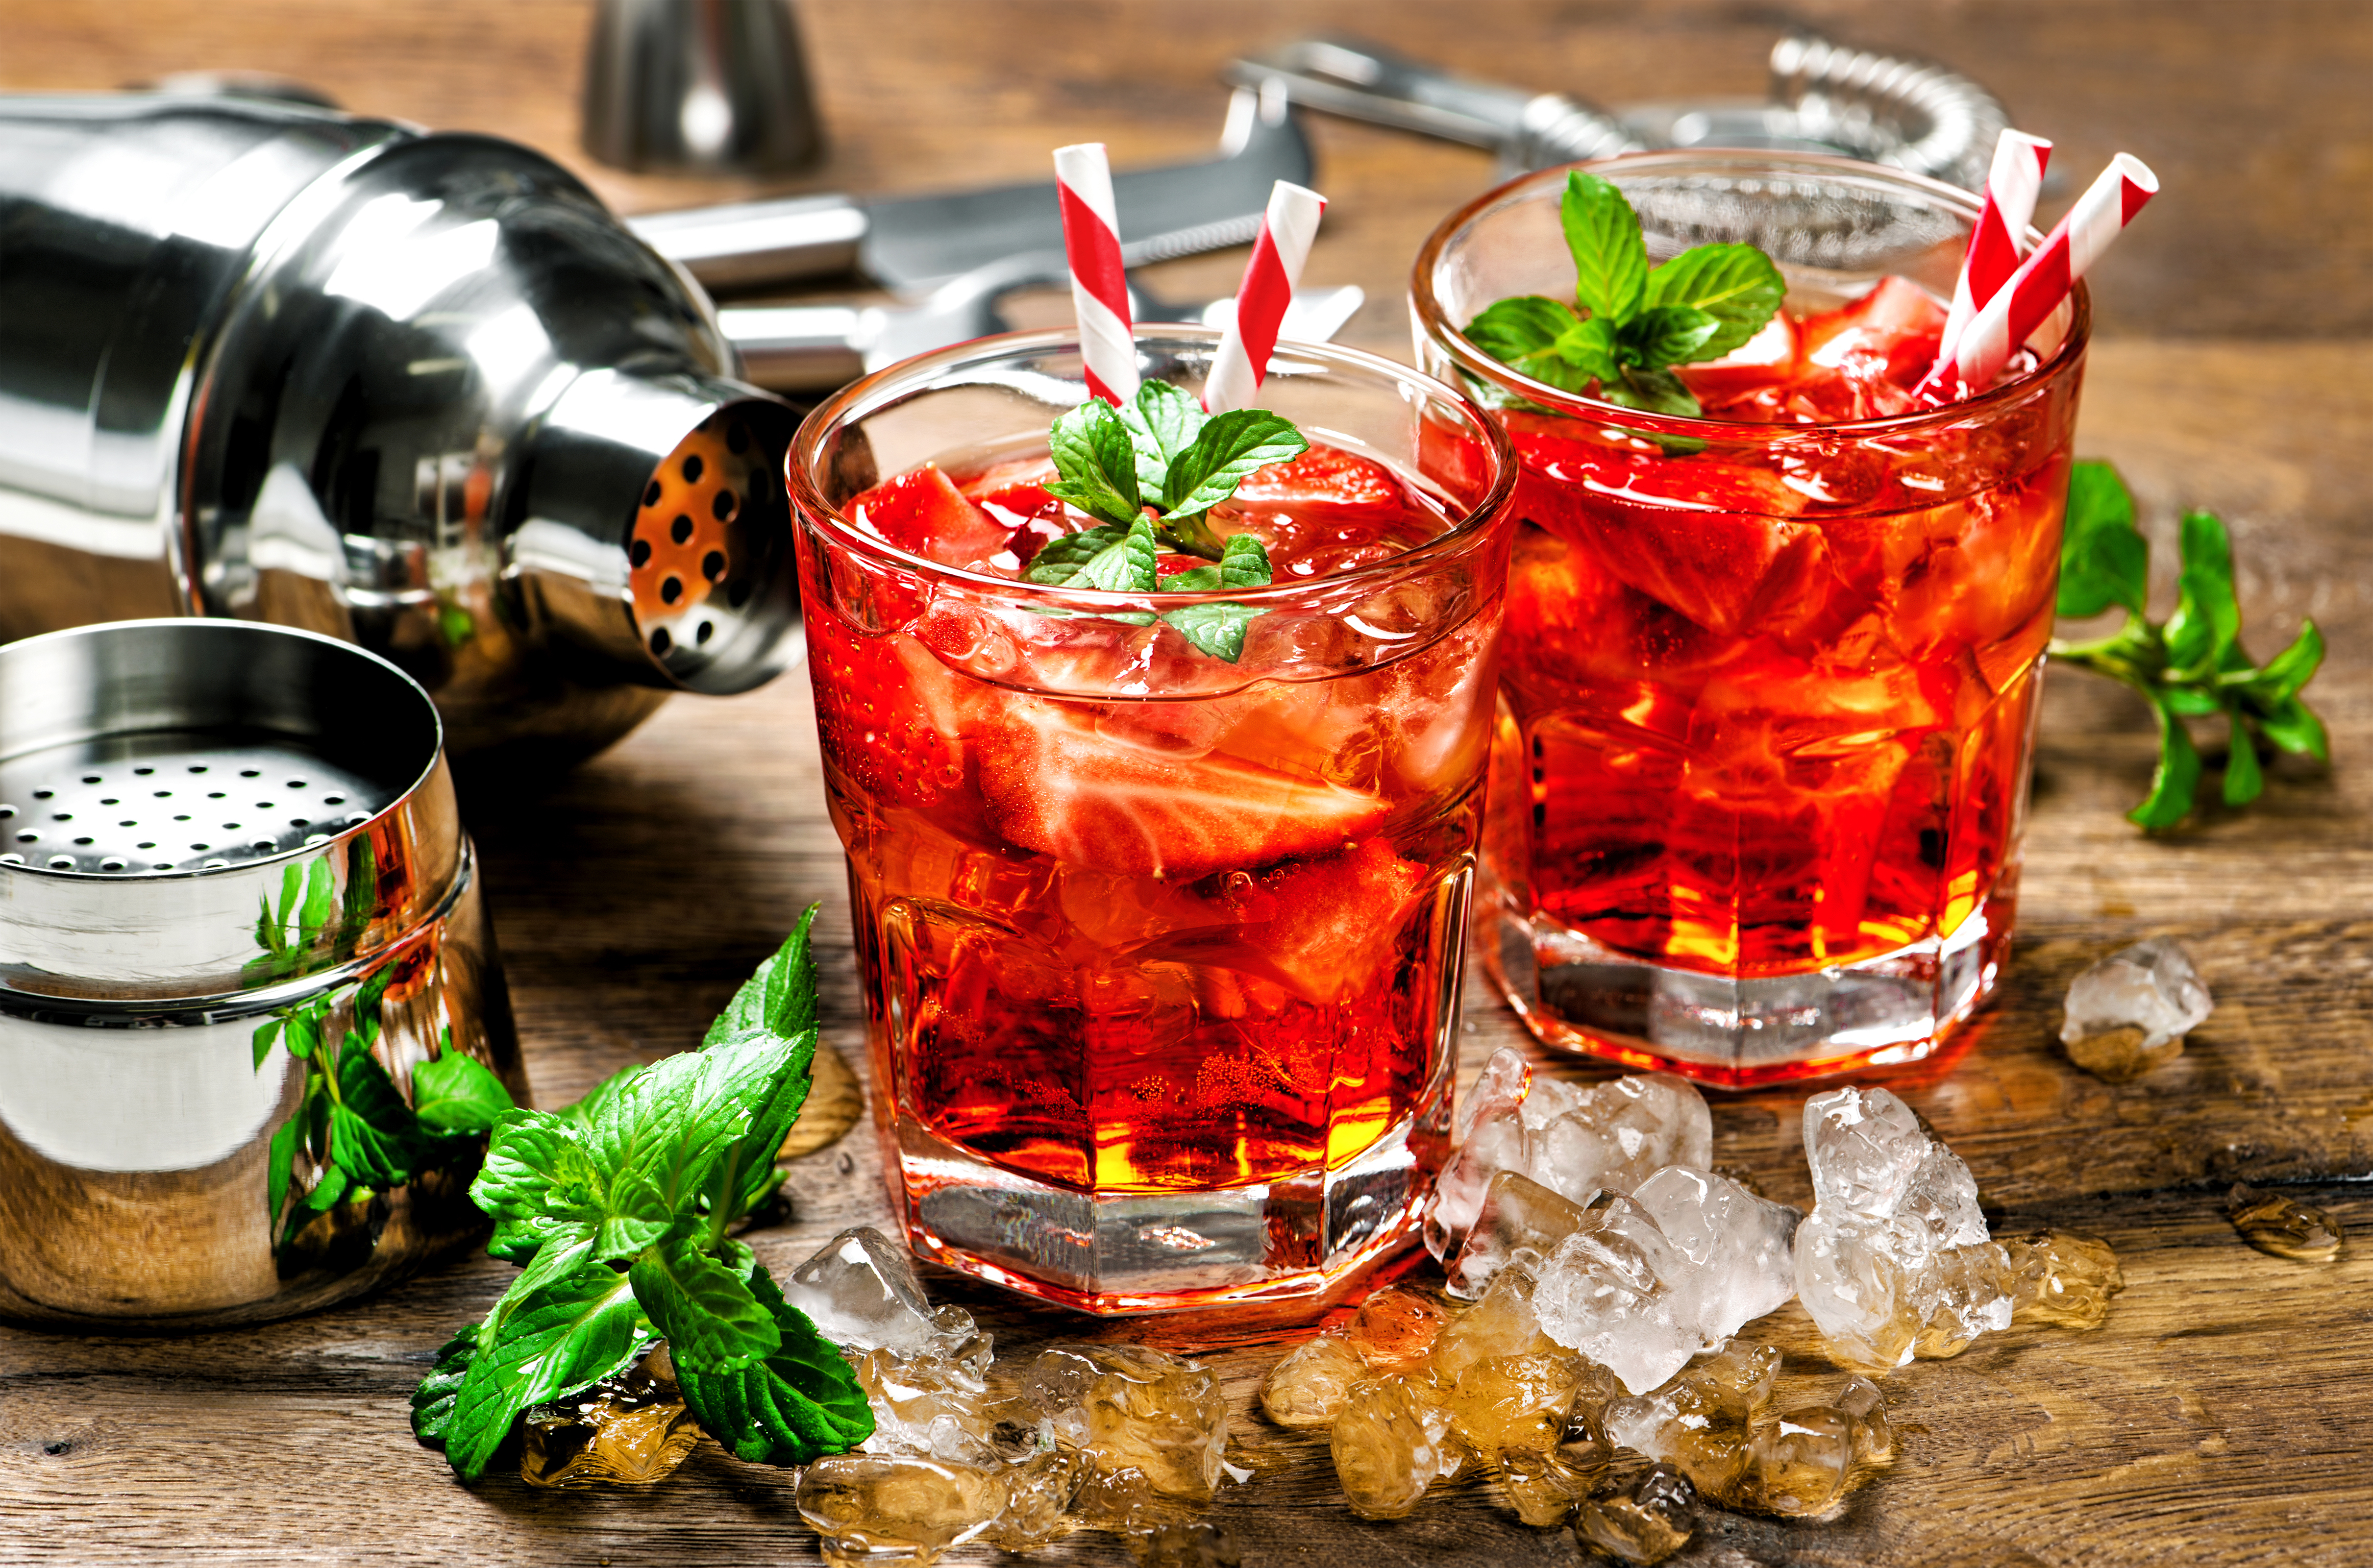 Red drink with strawberry, mint leaves, ice. Cocktail with campari, aperol, gin, liquor, juice, soda water